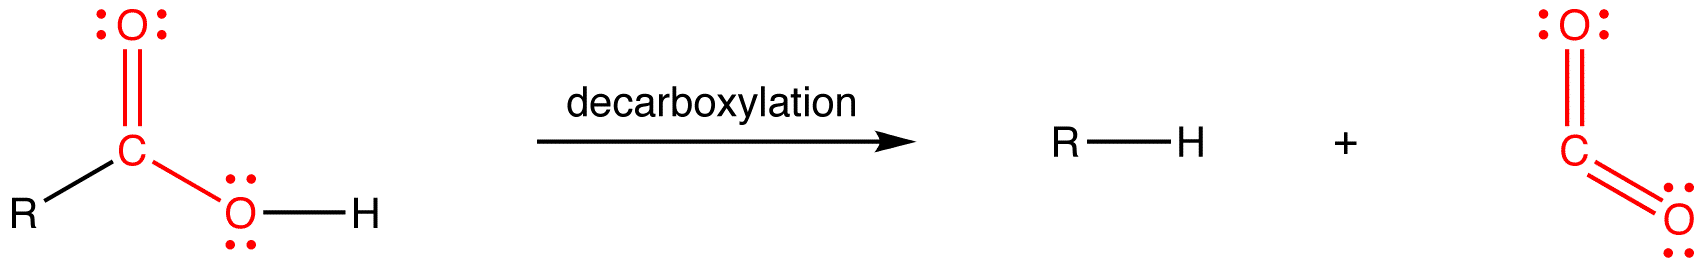 decarboxylation1.png